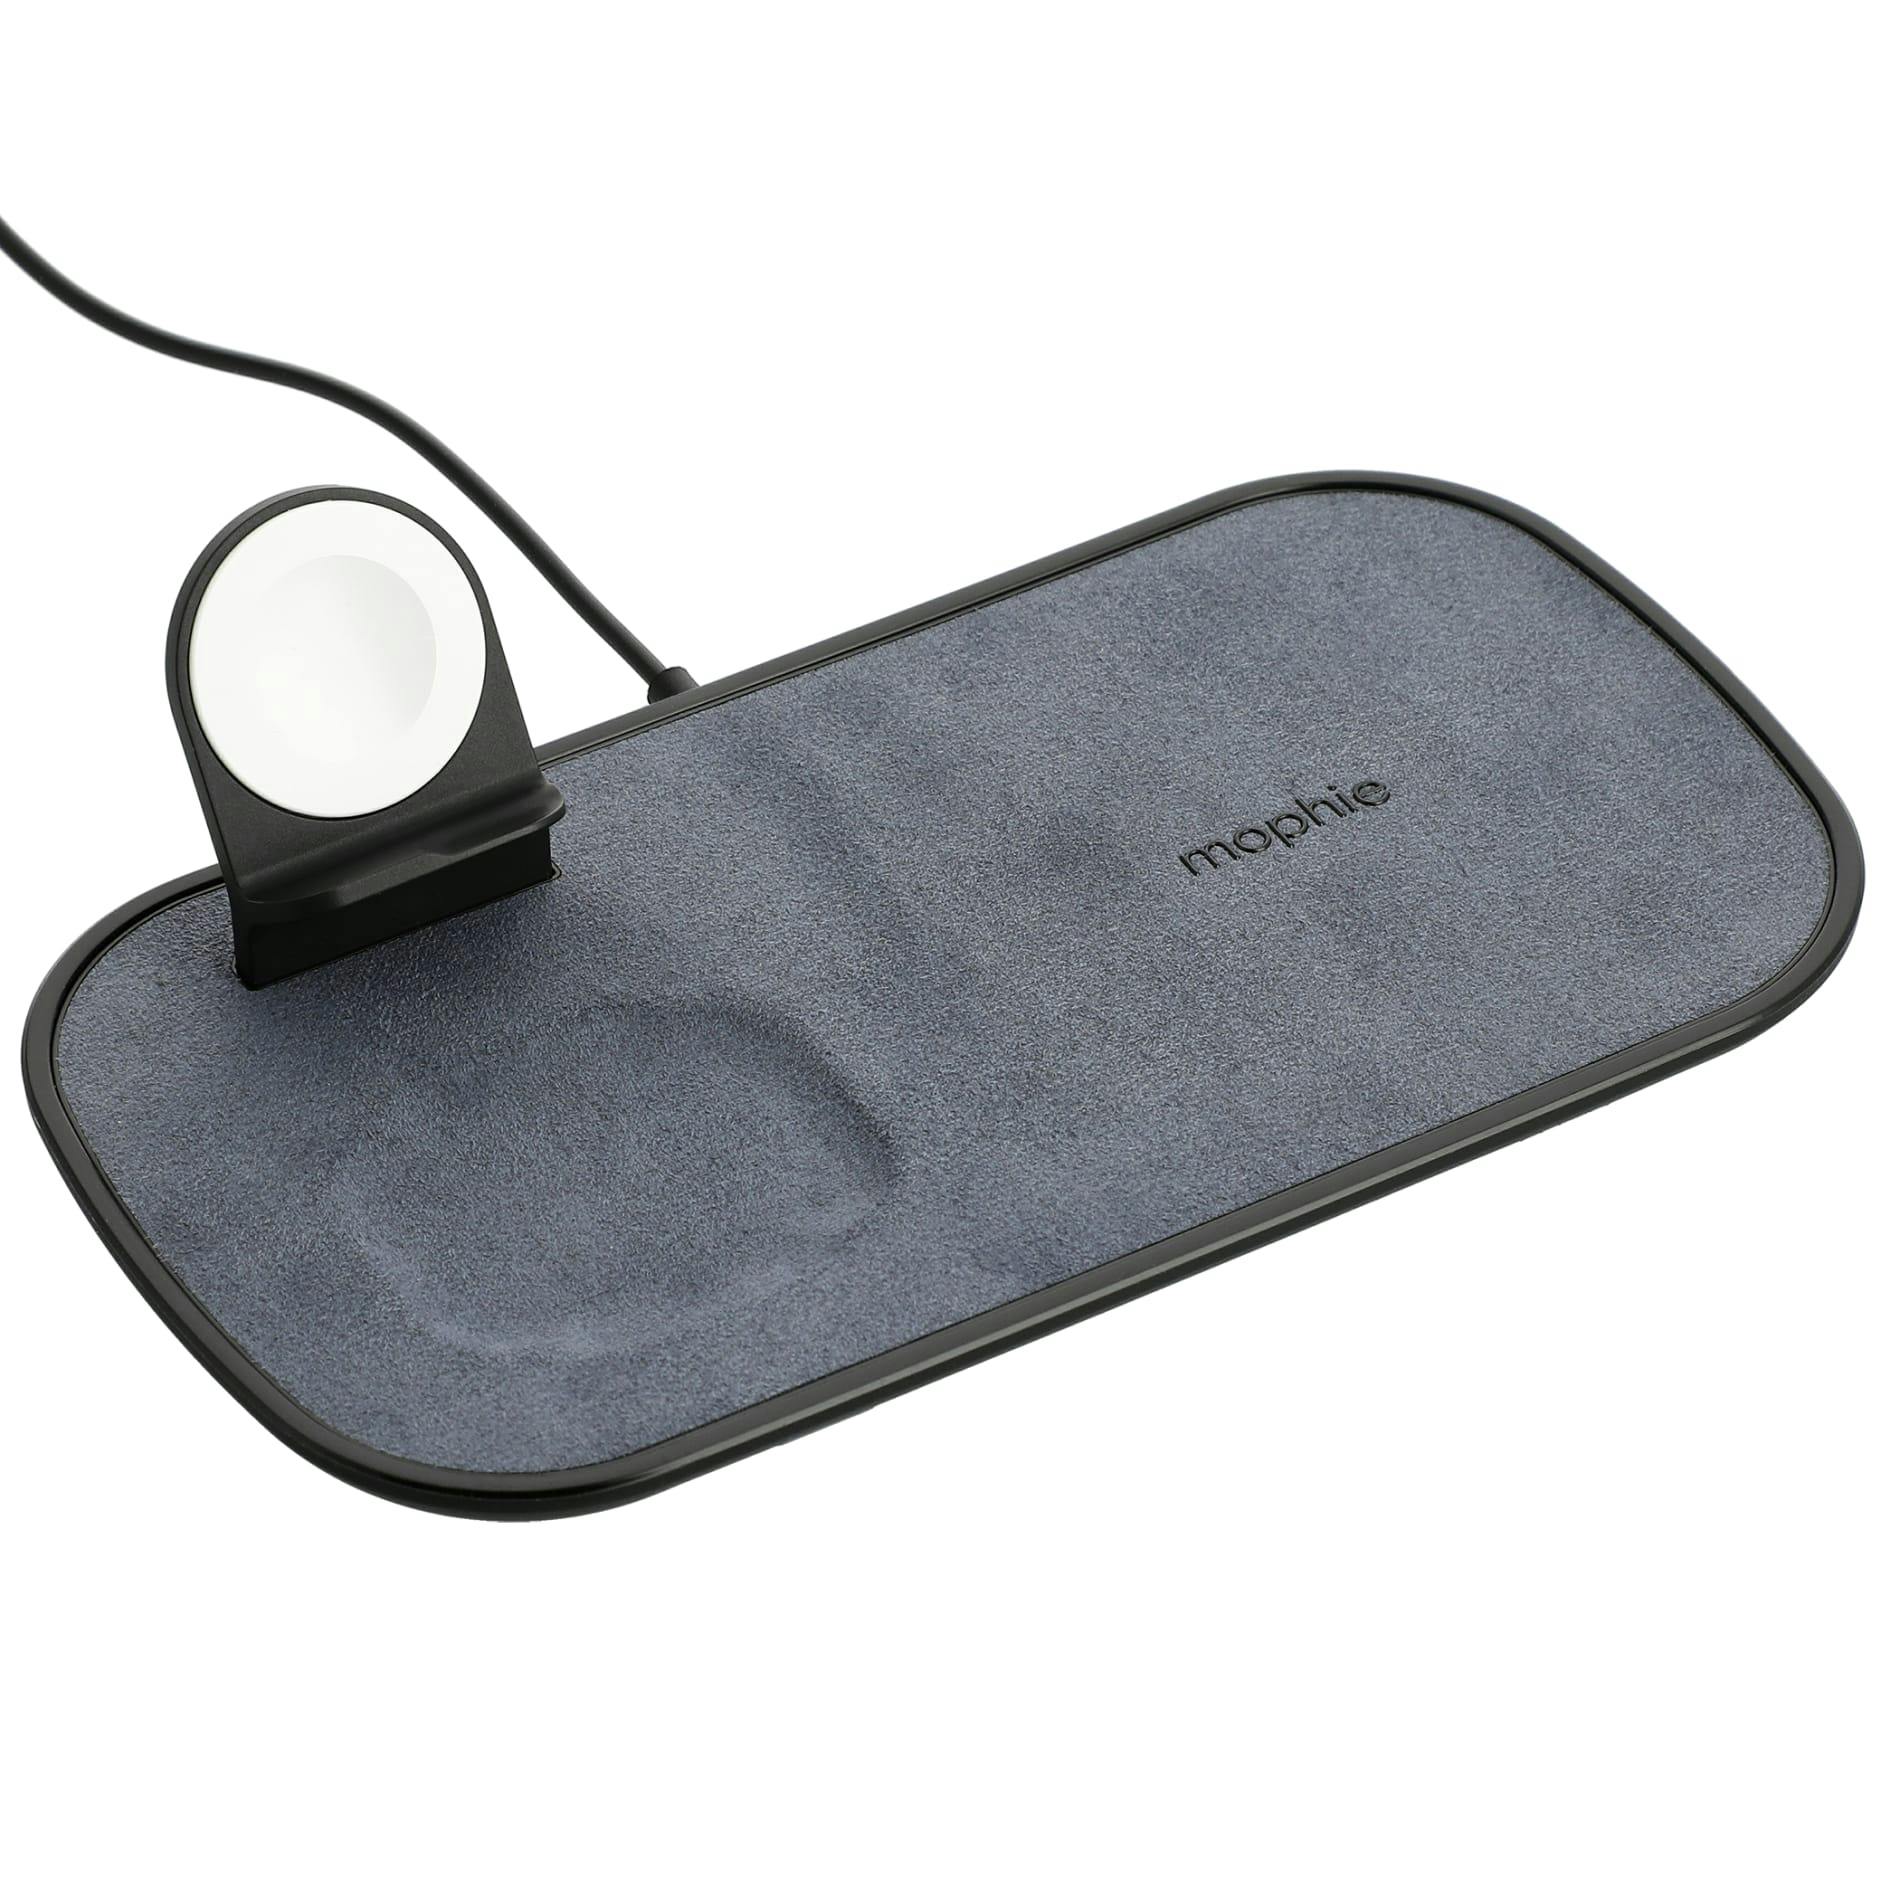 mophie® 3-in-1 Fabric Wireless Charging Pad - additional Image 1